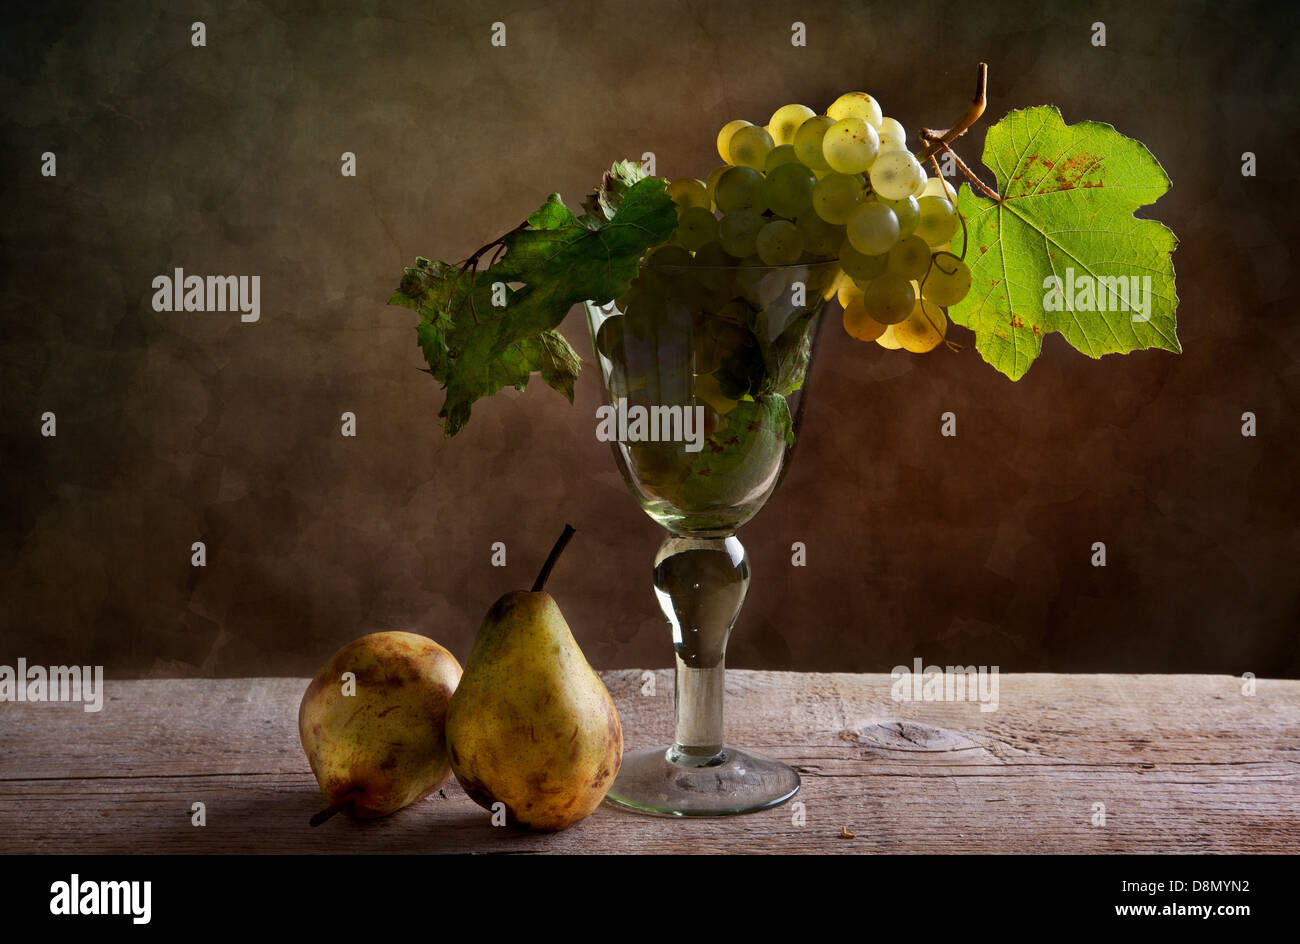 Pears and Grapes Stock Photo